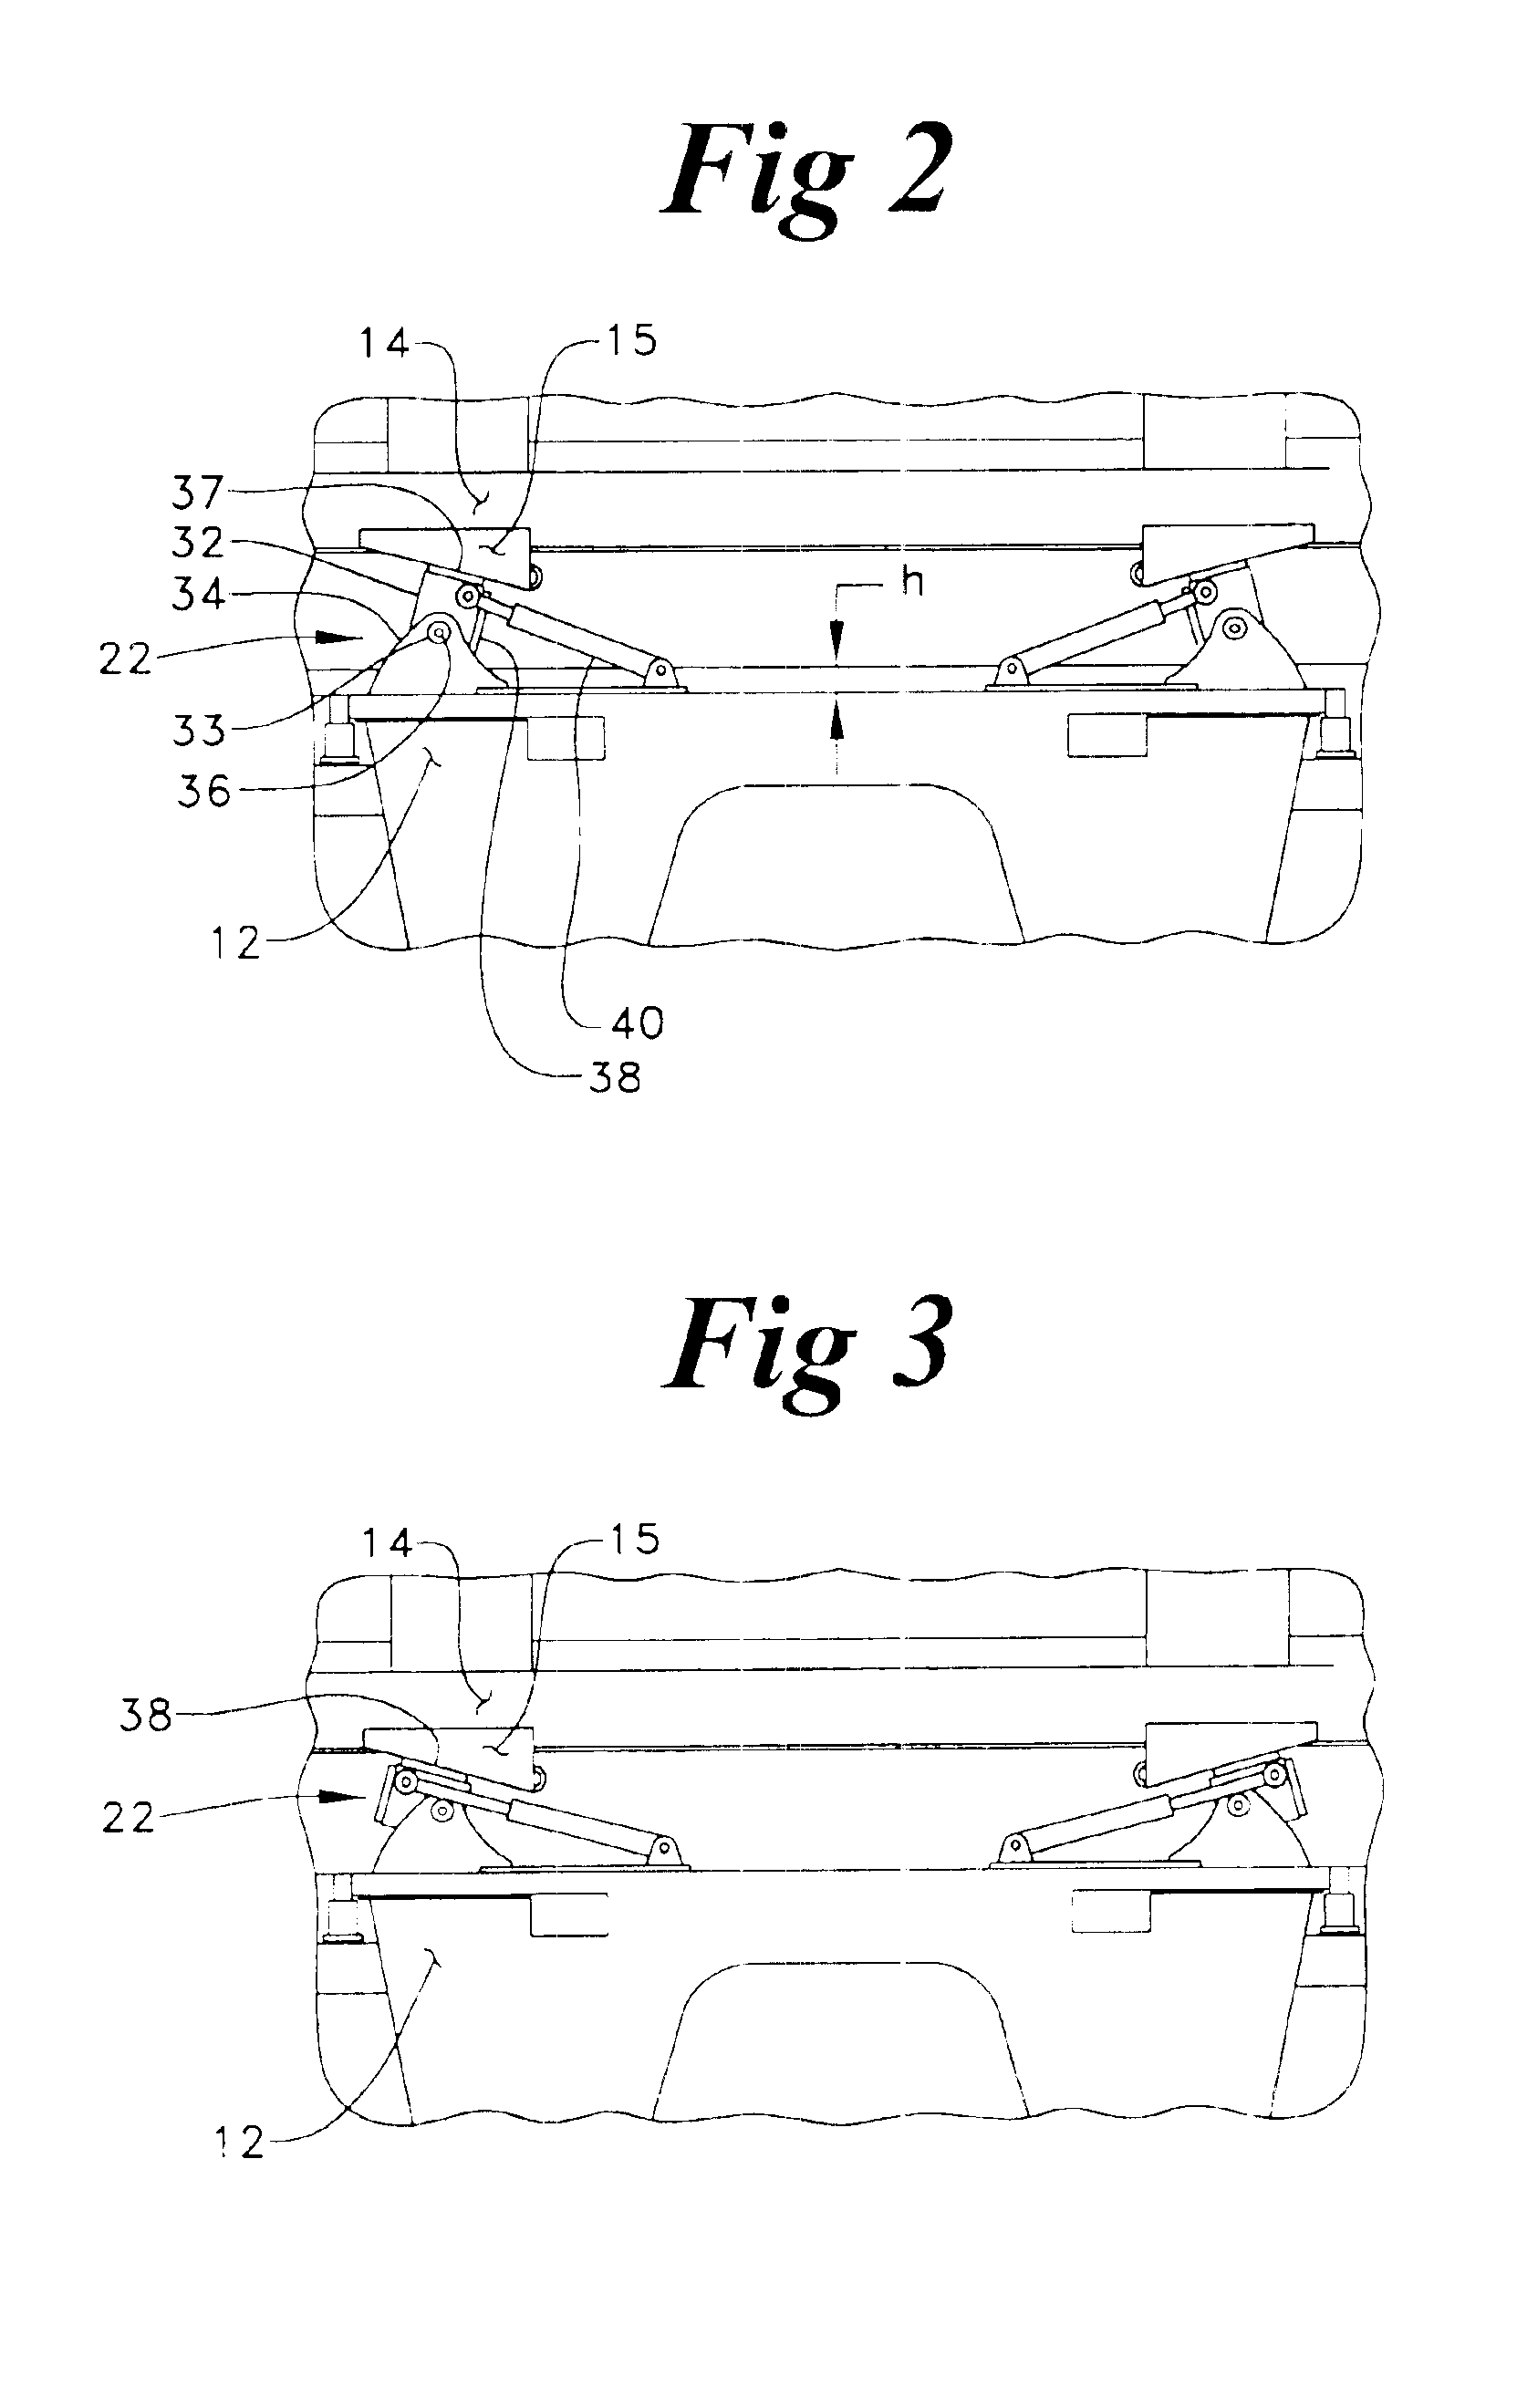 Dump truck with payload weight measuring system and method of using same